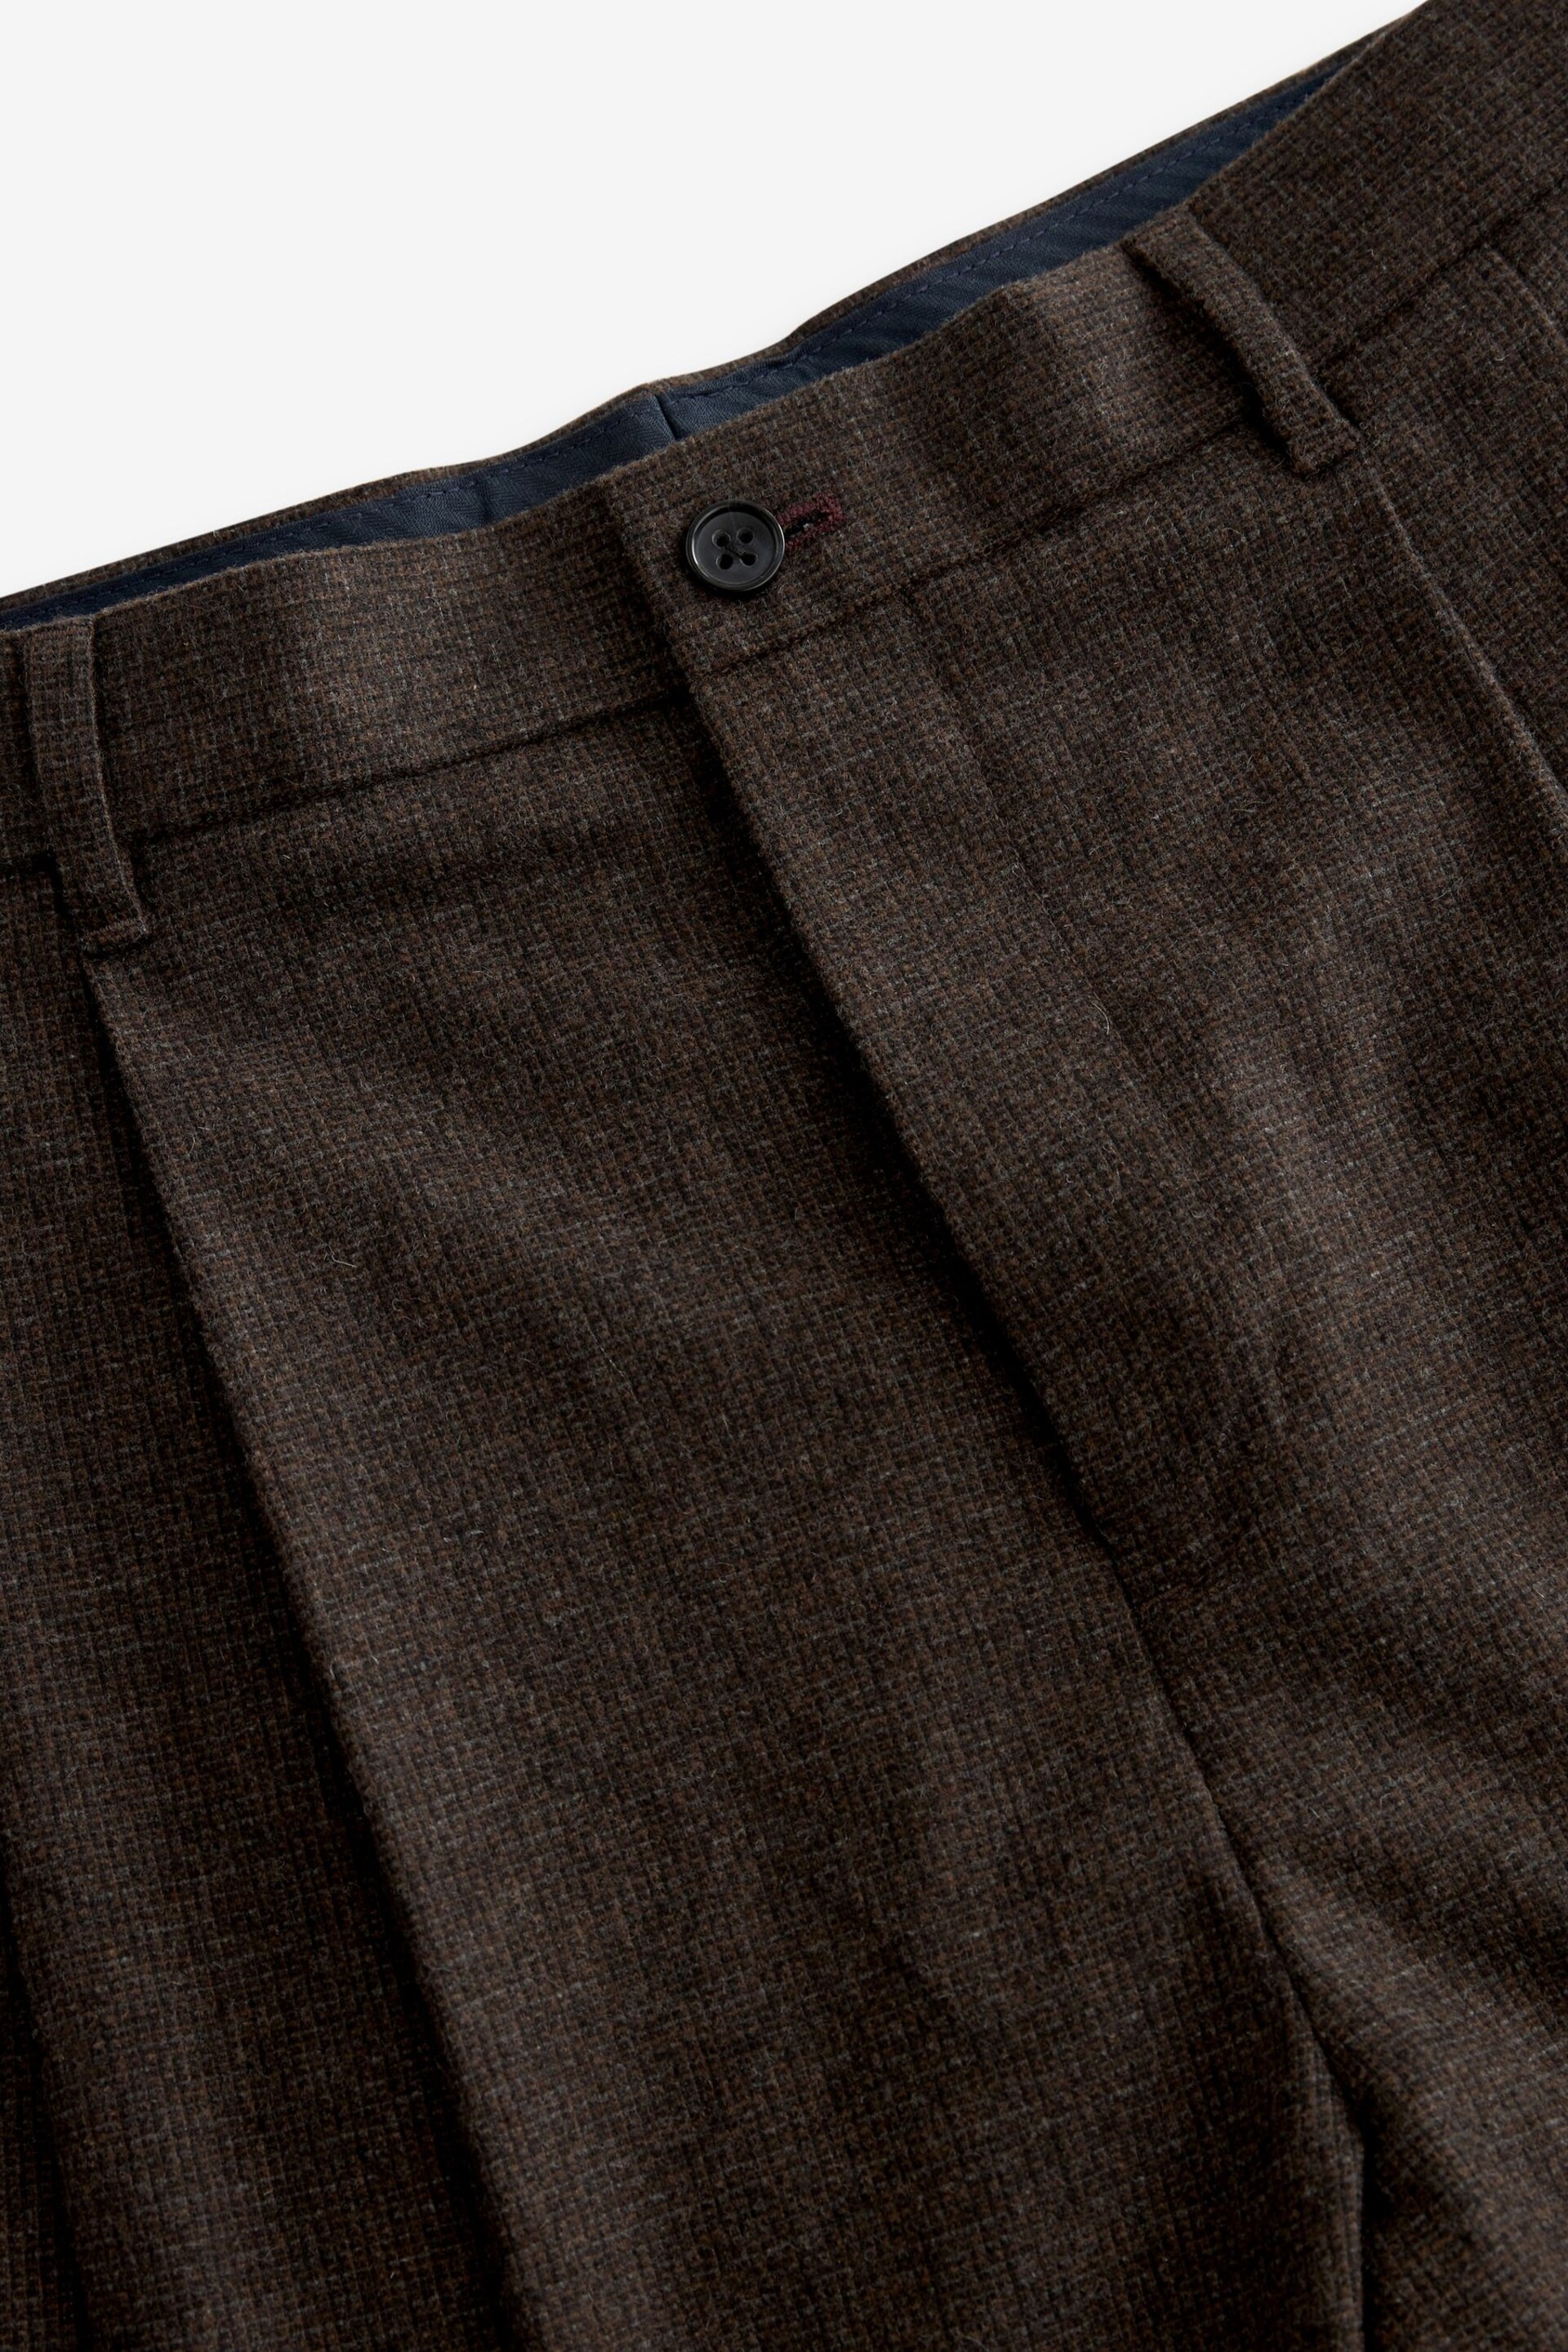 Textured Brown Nova Fides Italian Fabric Trousers With Wool - Image 7 of 8